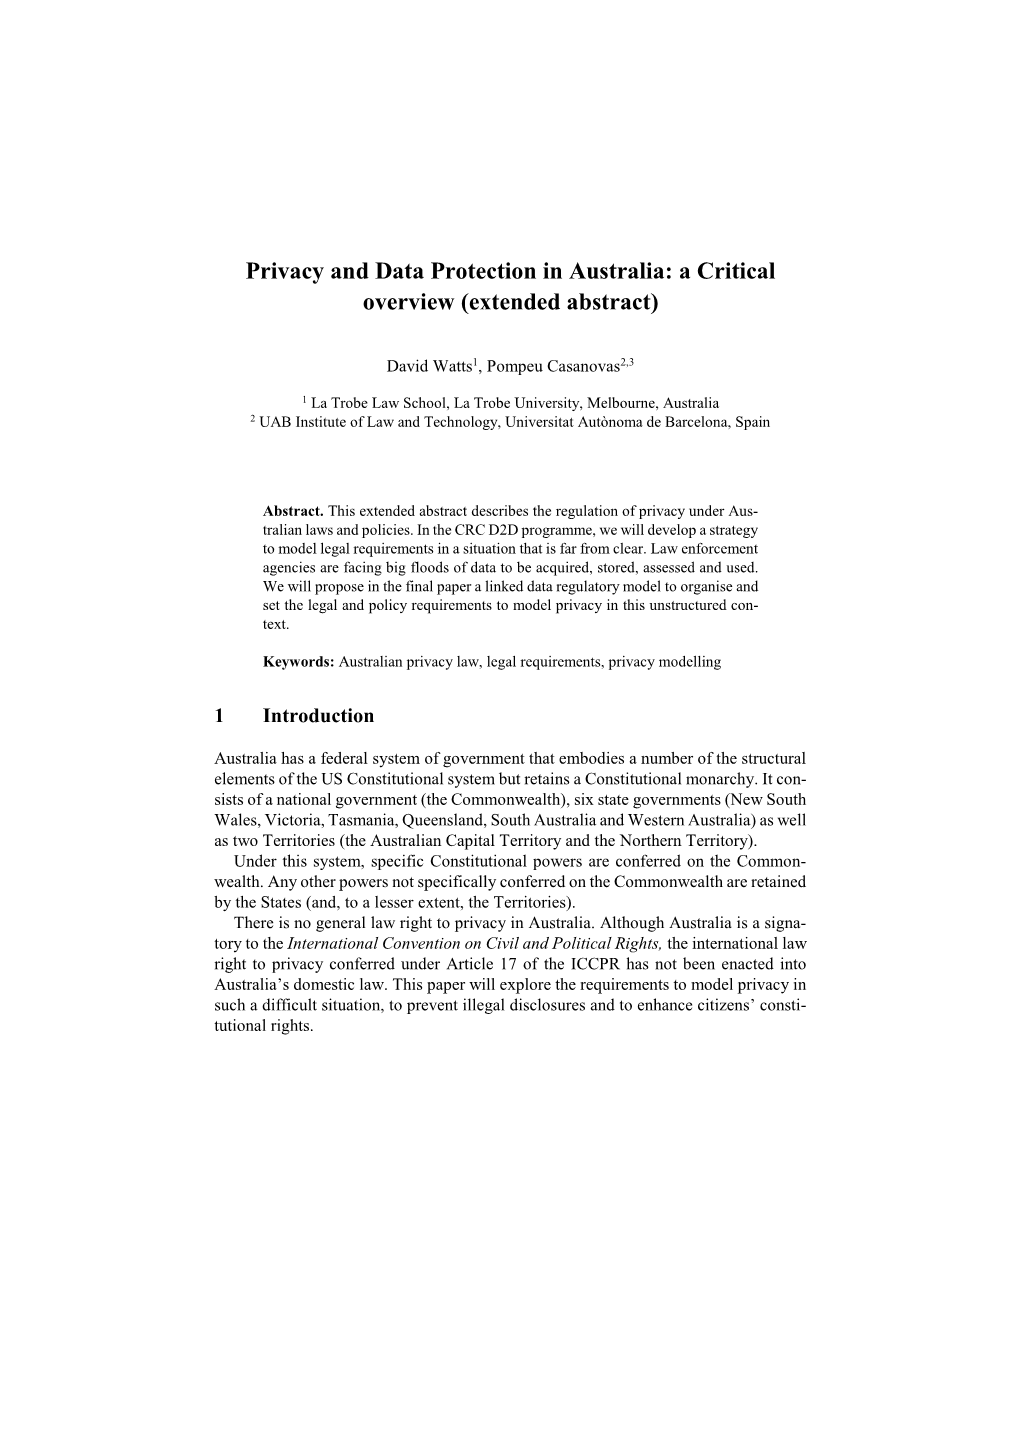 Privacy and Data Protection in Australia: a Critical Overview (Extended Abstract)